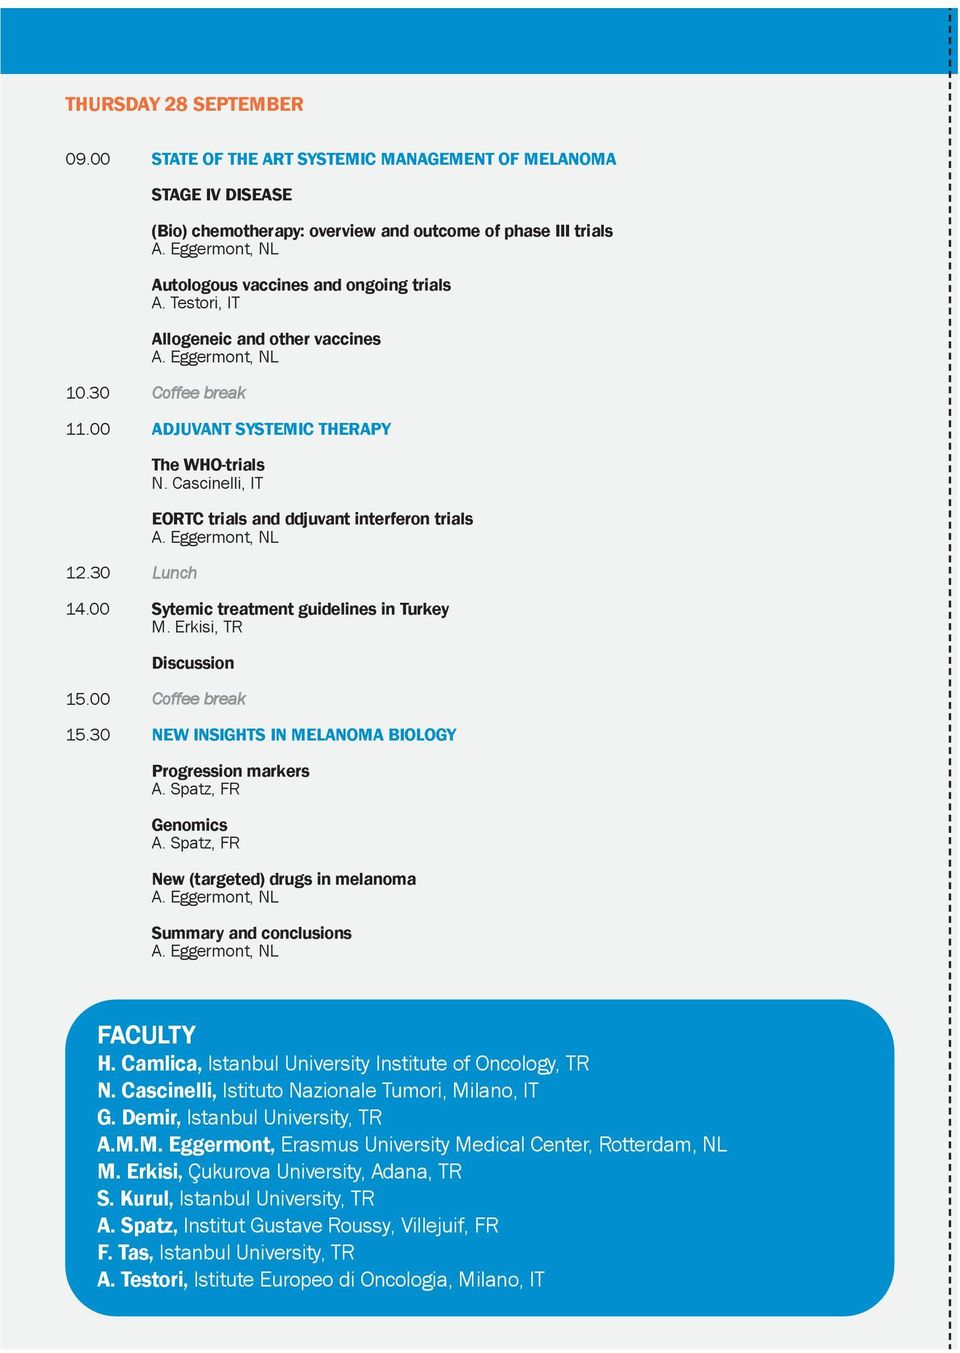 10.30 Coffee break 11.00 ADJUVANT SYSTEMIC THERAPY 12.30 Lunch The WHO-trials N. Cascinelli, IT EORTC trials and ddjuvant interferon trials 14.00 Sytemic treatment guidelines in Turkey M.